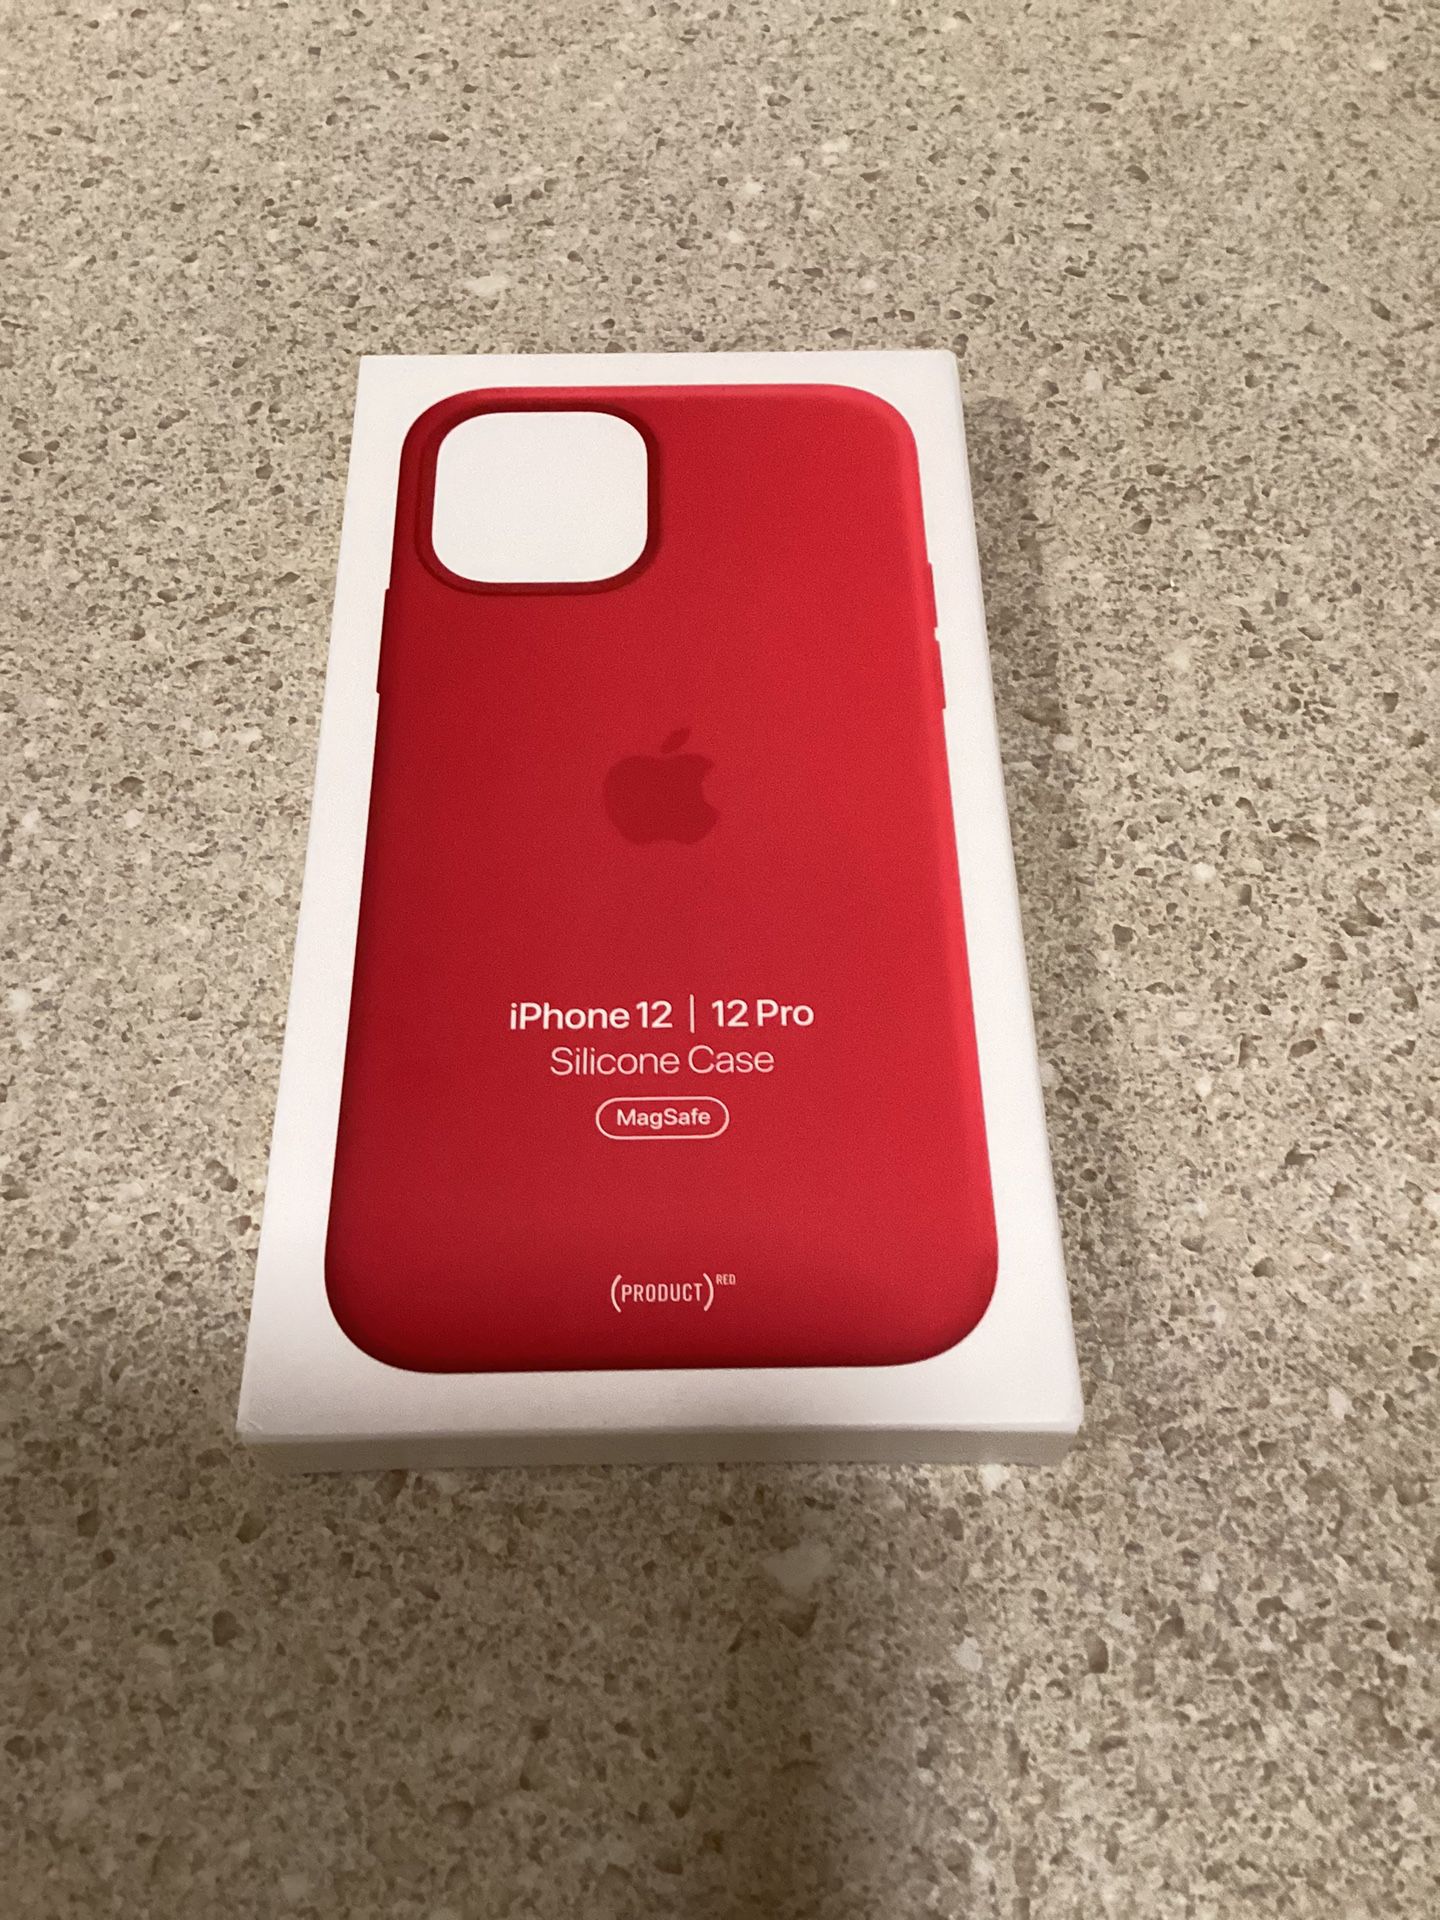 Genuine Apple iPhone 12 Silicone Case - Red.  (New, Unopened)